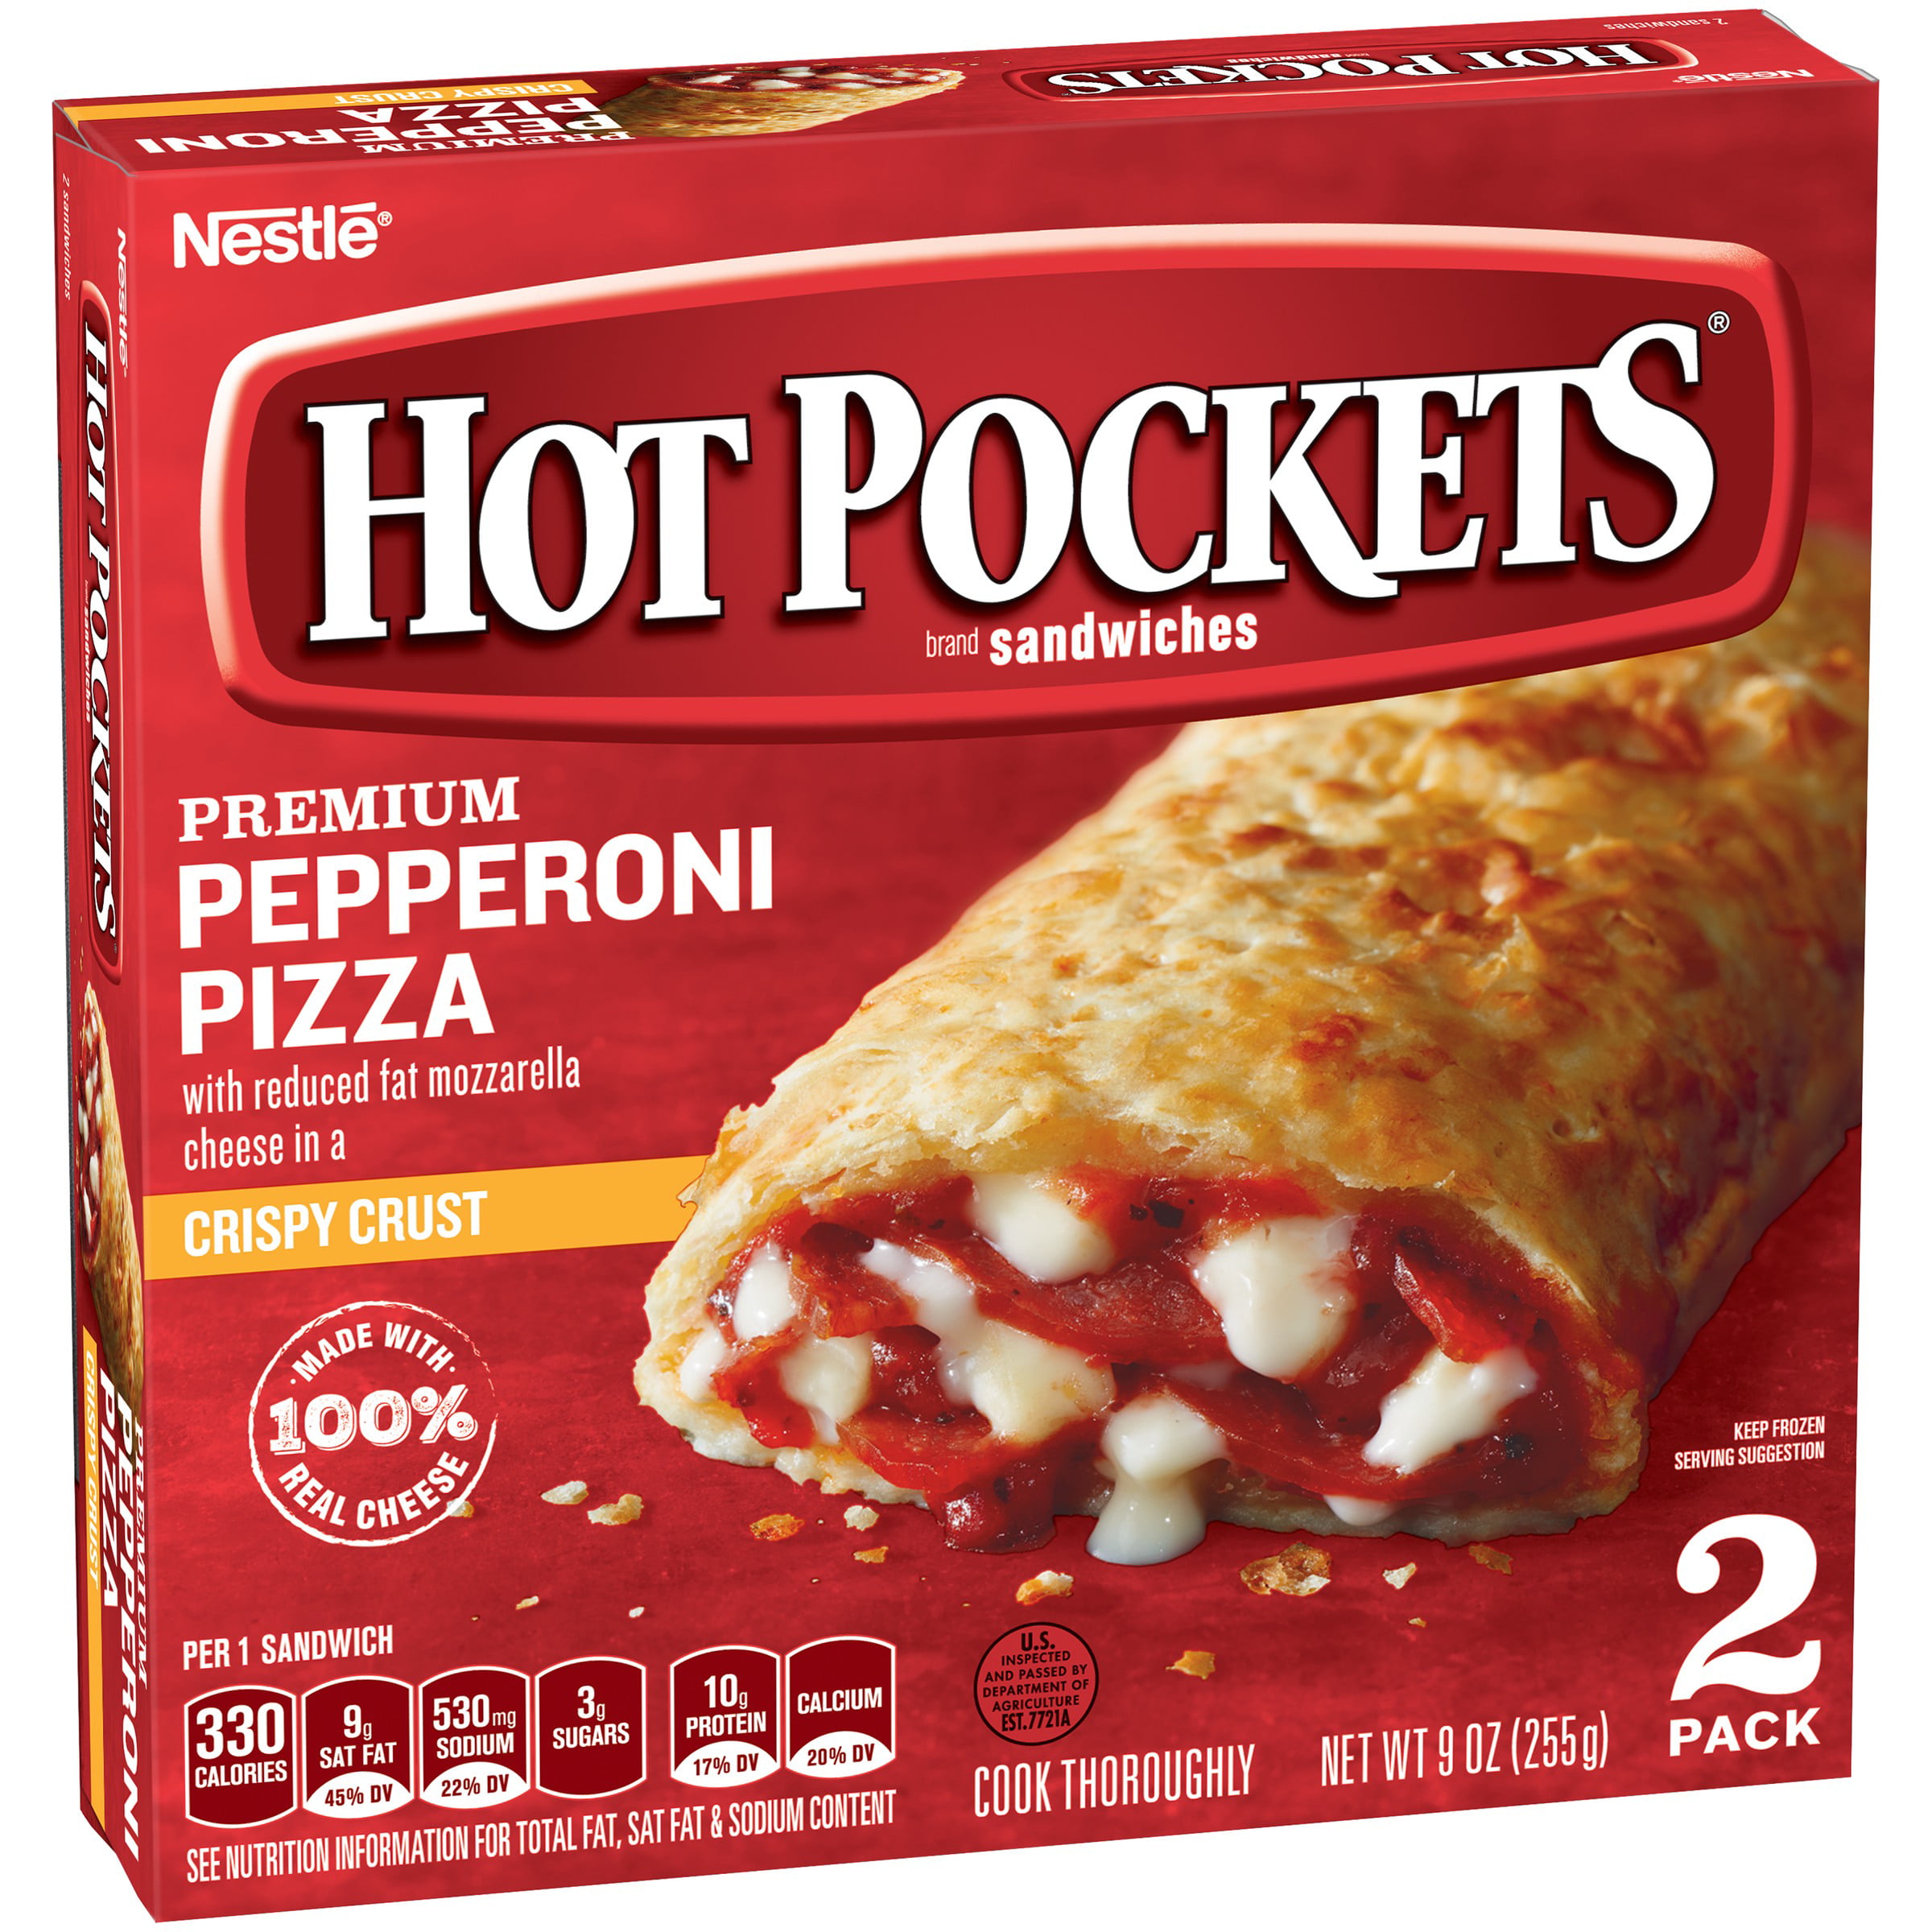 How To Cook A Hot Pocket In The Microwave BestMicrowave